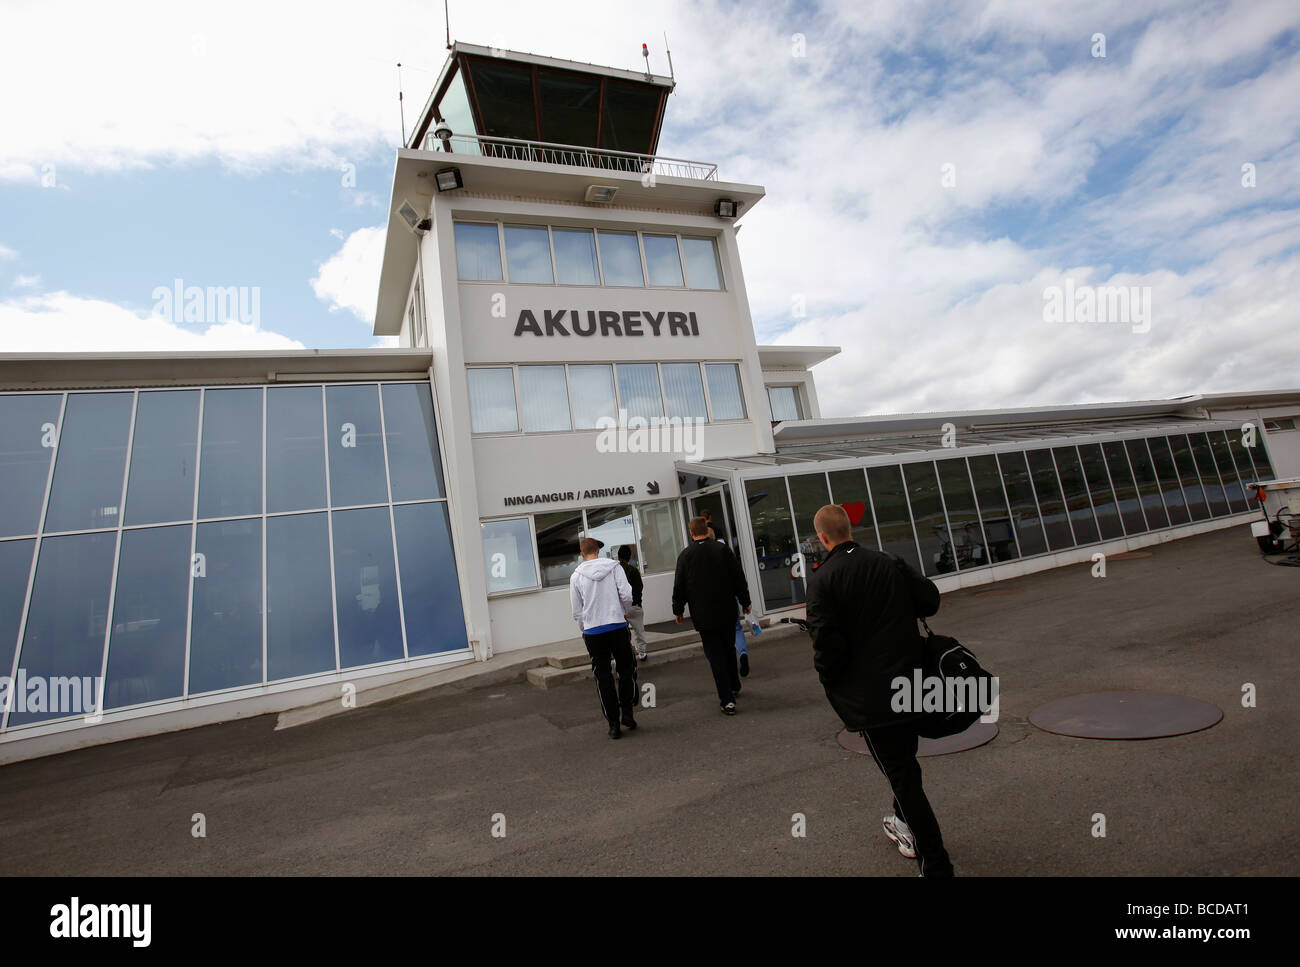 Passengers arriving to the terminal at the airport in Akureyri, Iceland Stock Photo